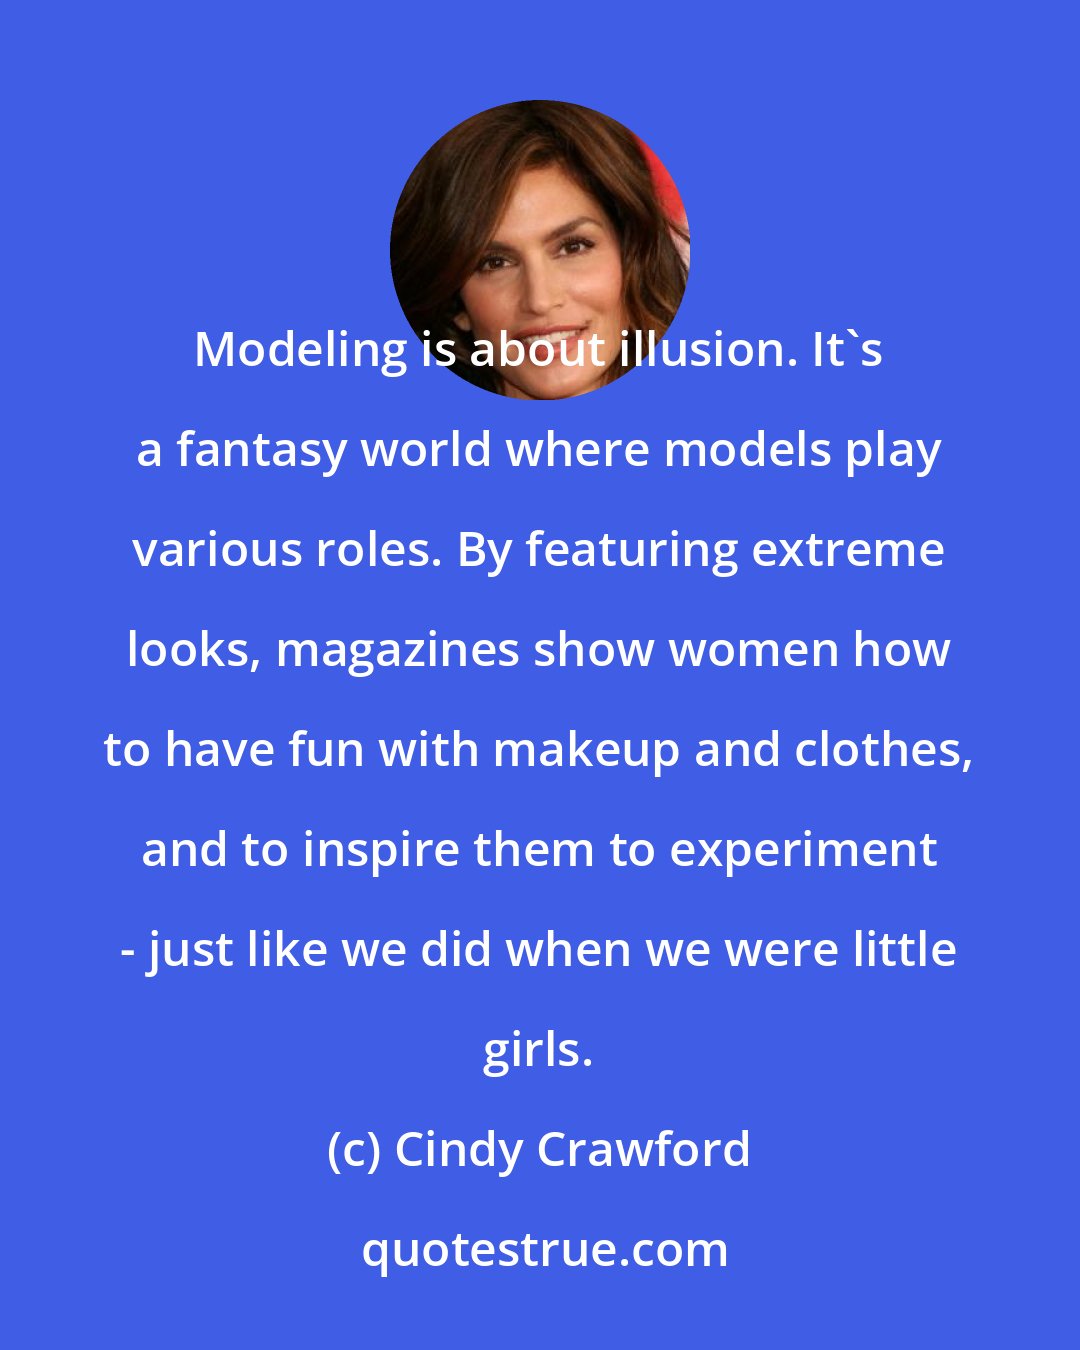 Cindy Crawford: Modeling is about illusion. It's a fantasy world where models play various roles. By featuring extreme looks, magazines show women how to have fun with makeup and clothes, and to inspire them to experiment - just like we did when we were little girls.